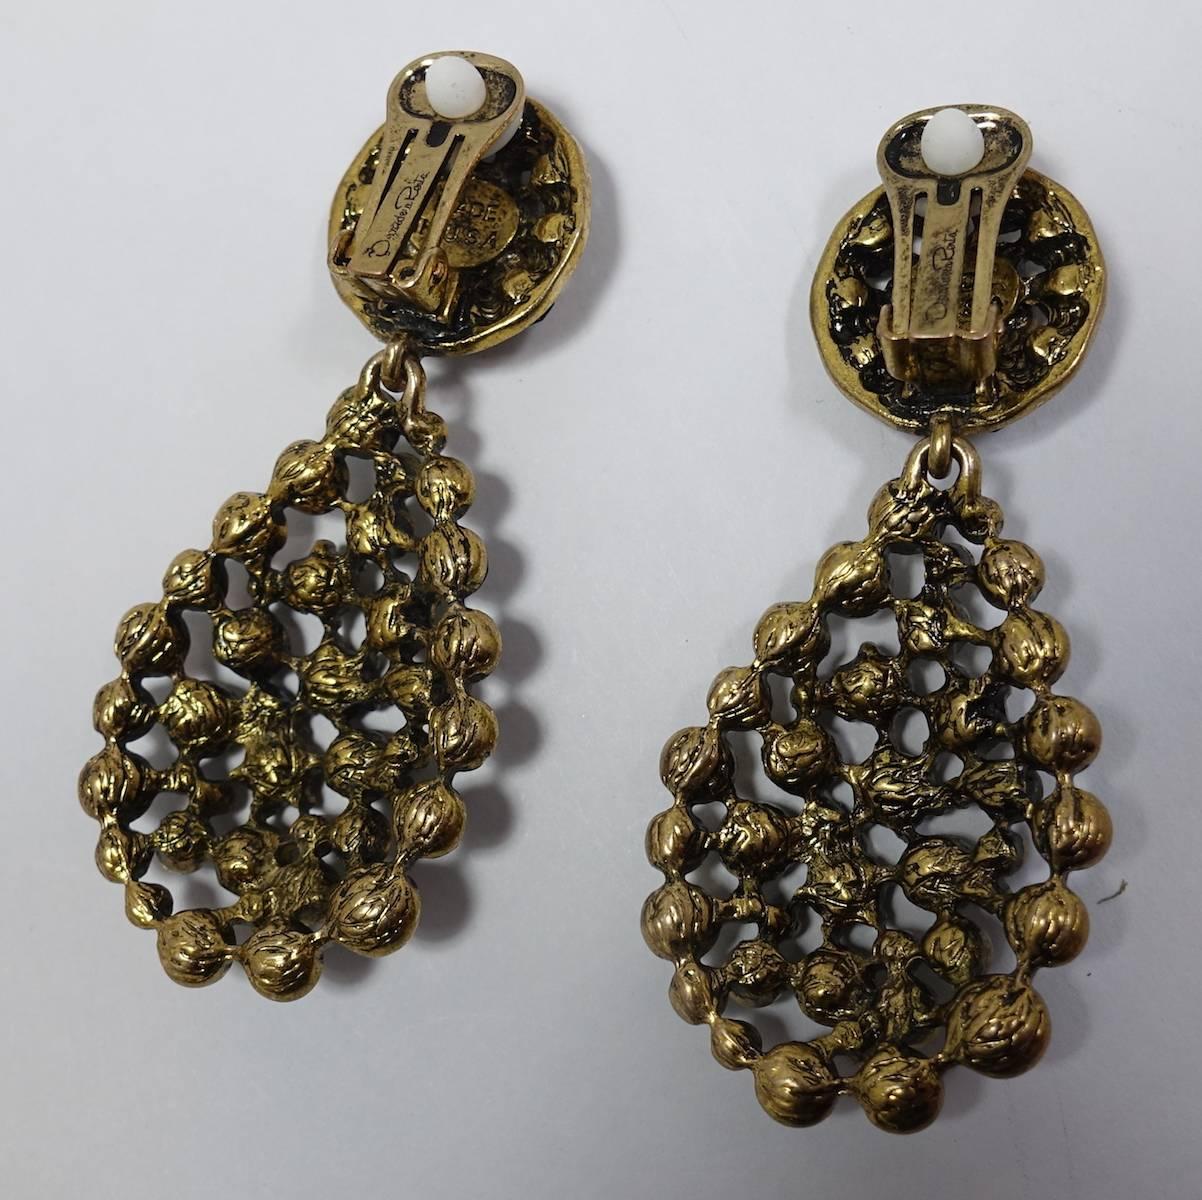 These Oscar de la Renta earrings feature green rhinestones in a gold tone metal setting.  They measure 2-7/8” x 1-1/4” and signed “Oscar de la Renta”.  These earrings are in excellent condition.